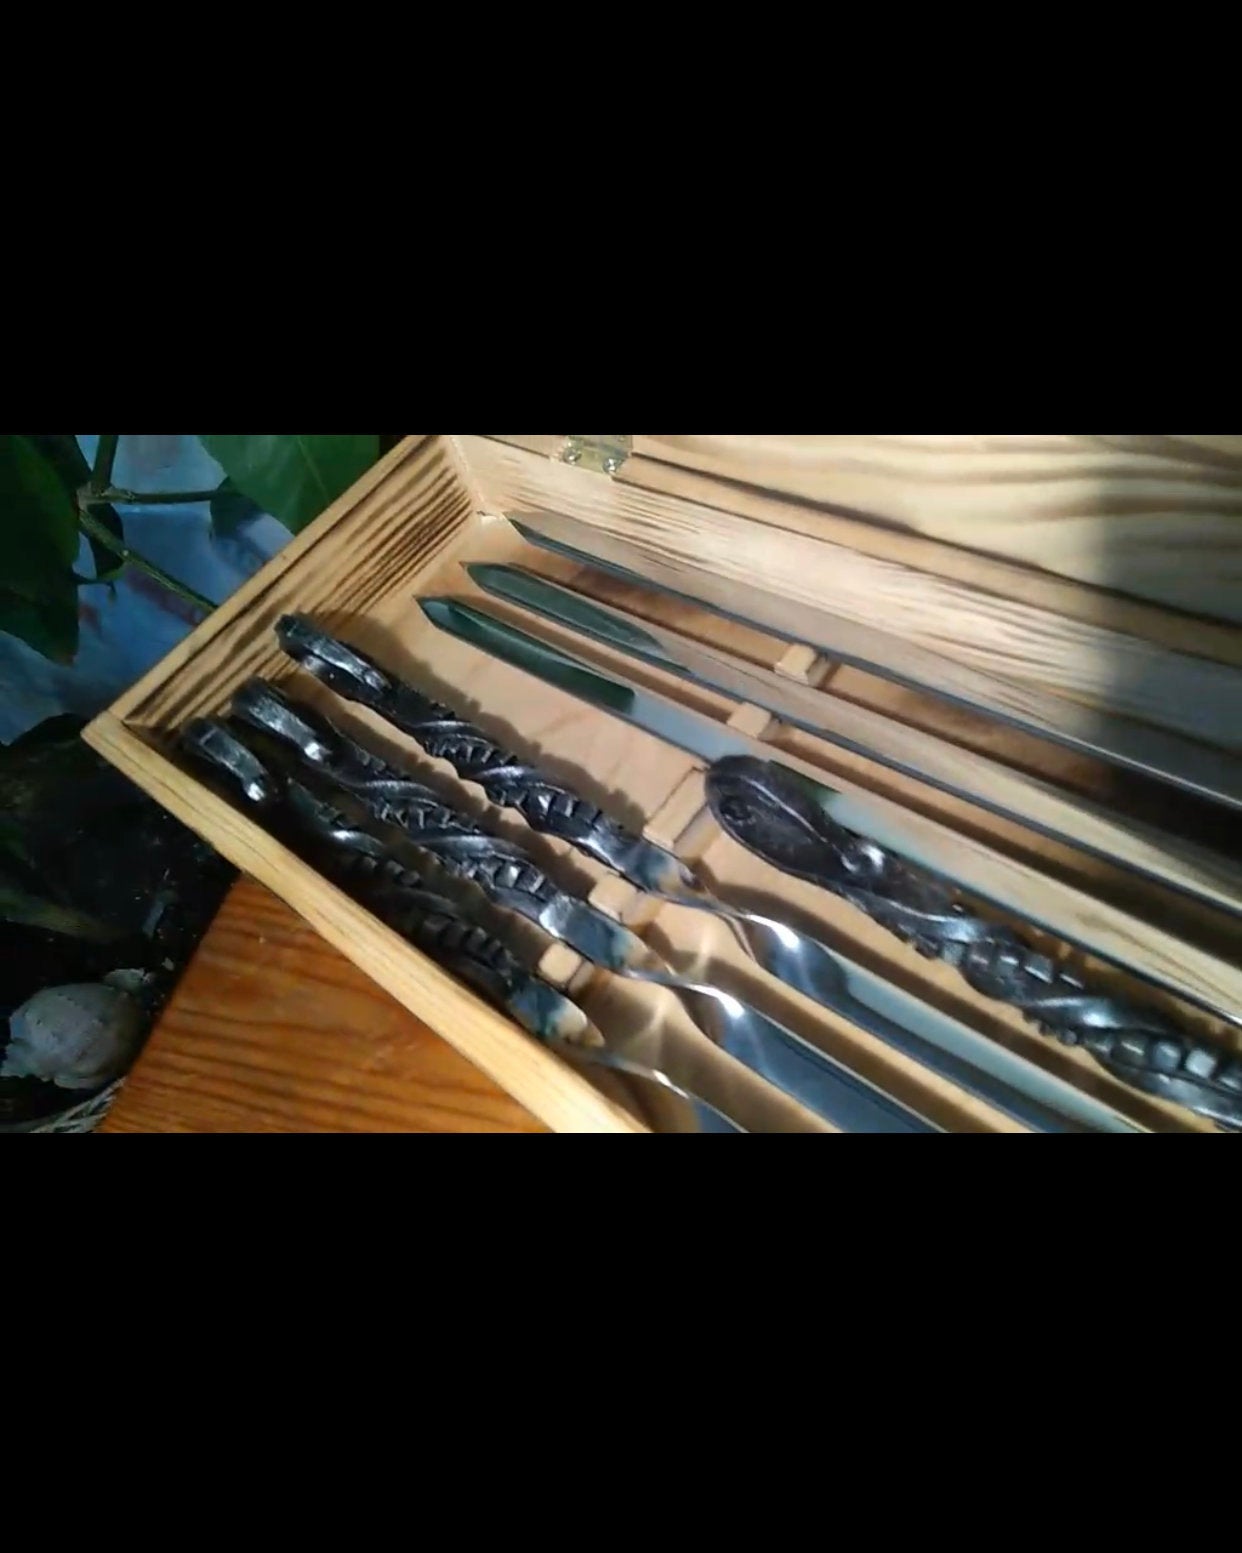 Skewers, fork, gift box, BBQ gift, Christmas gift, Dads gift, gift for grandpa, steel anniversary,mens gift,camping fire,camping gifts,grill